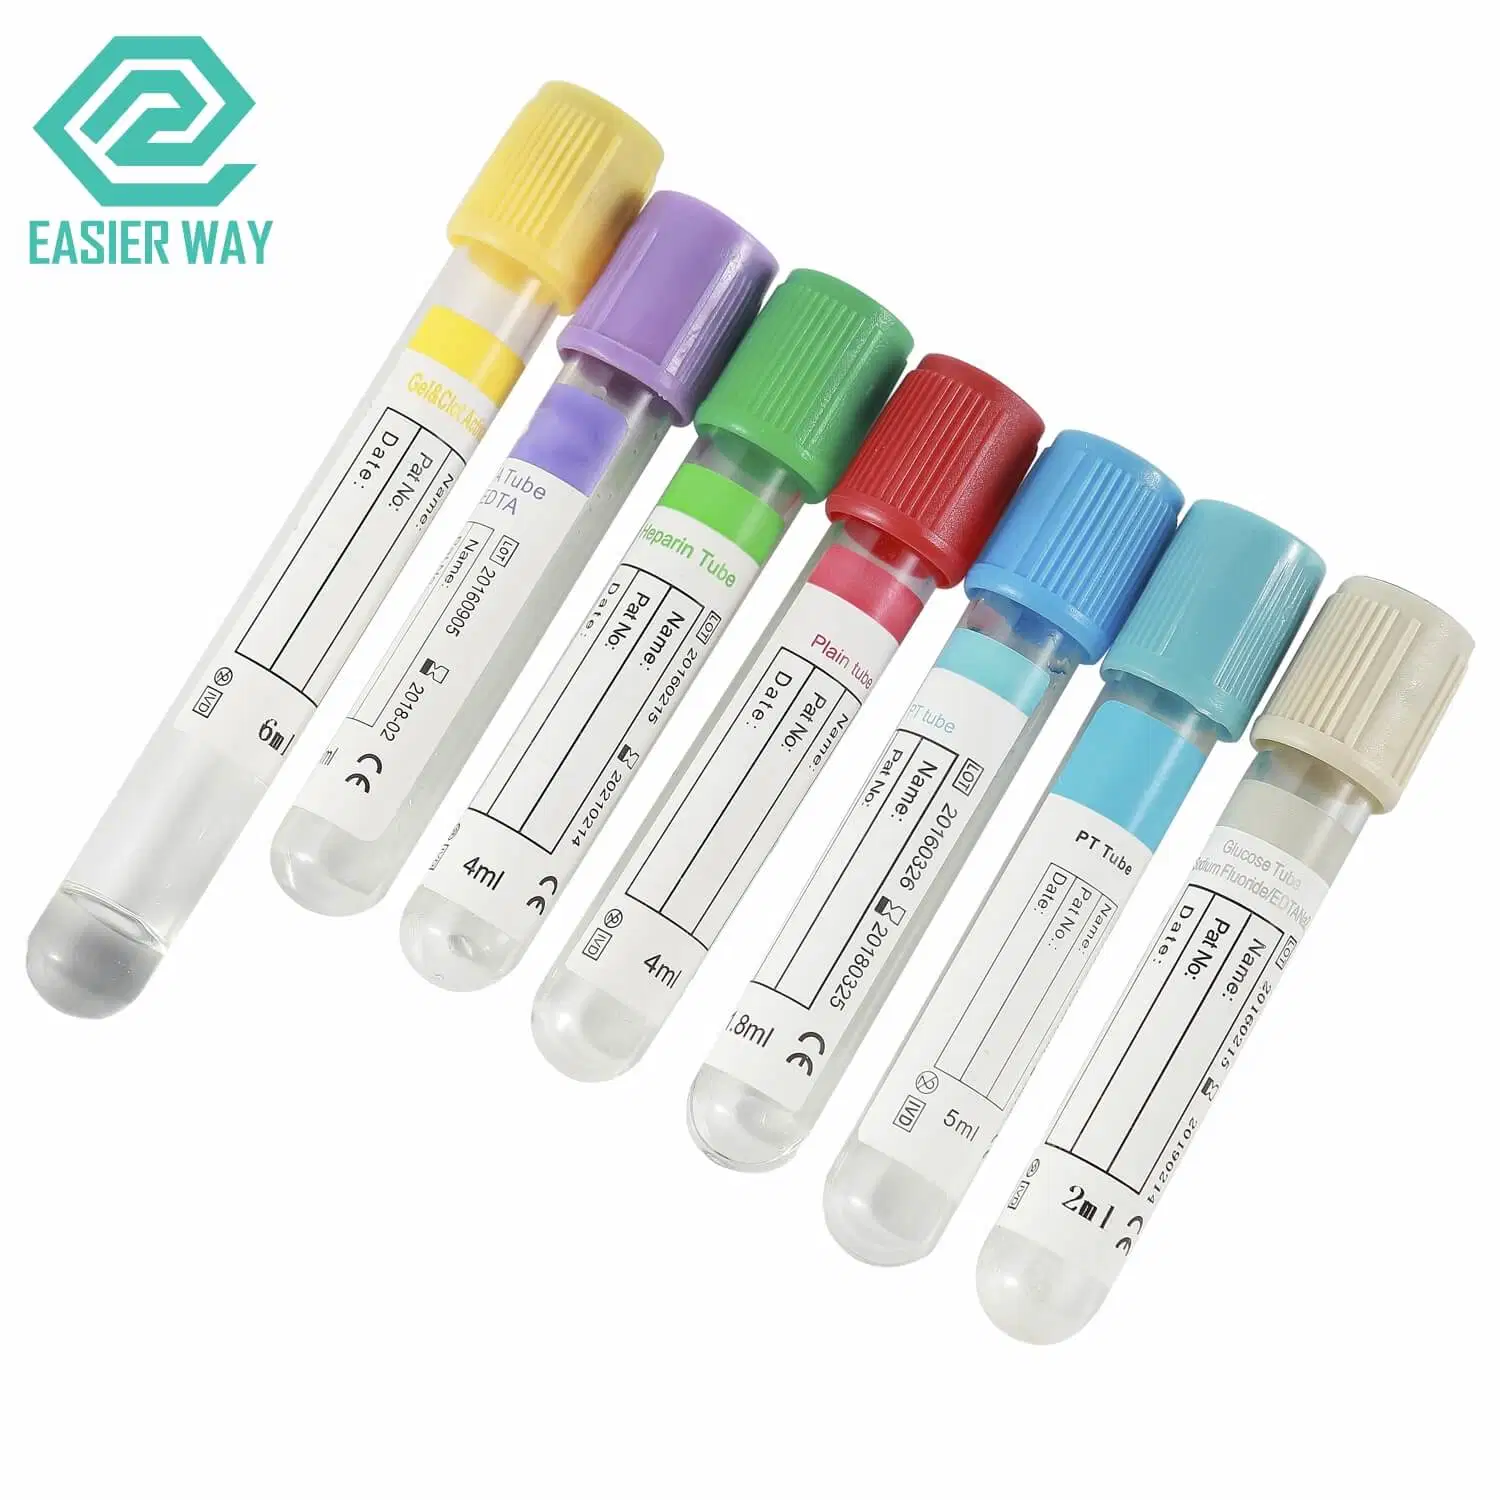 All Kinds of Blood Collection Tubes Blood Sample Vials